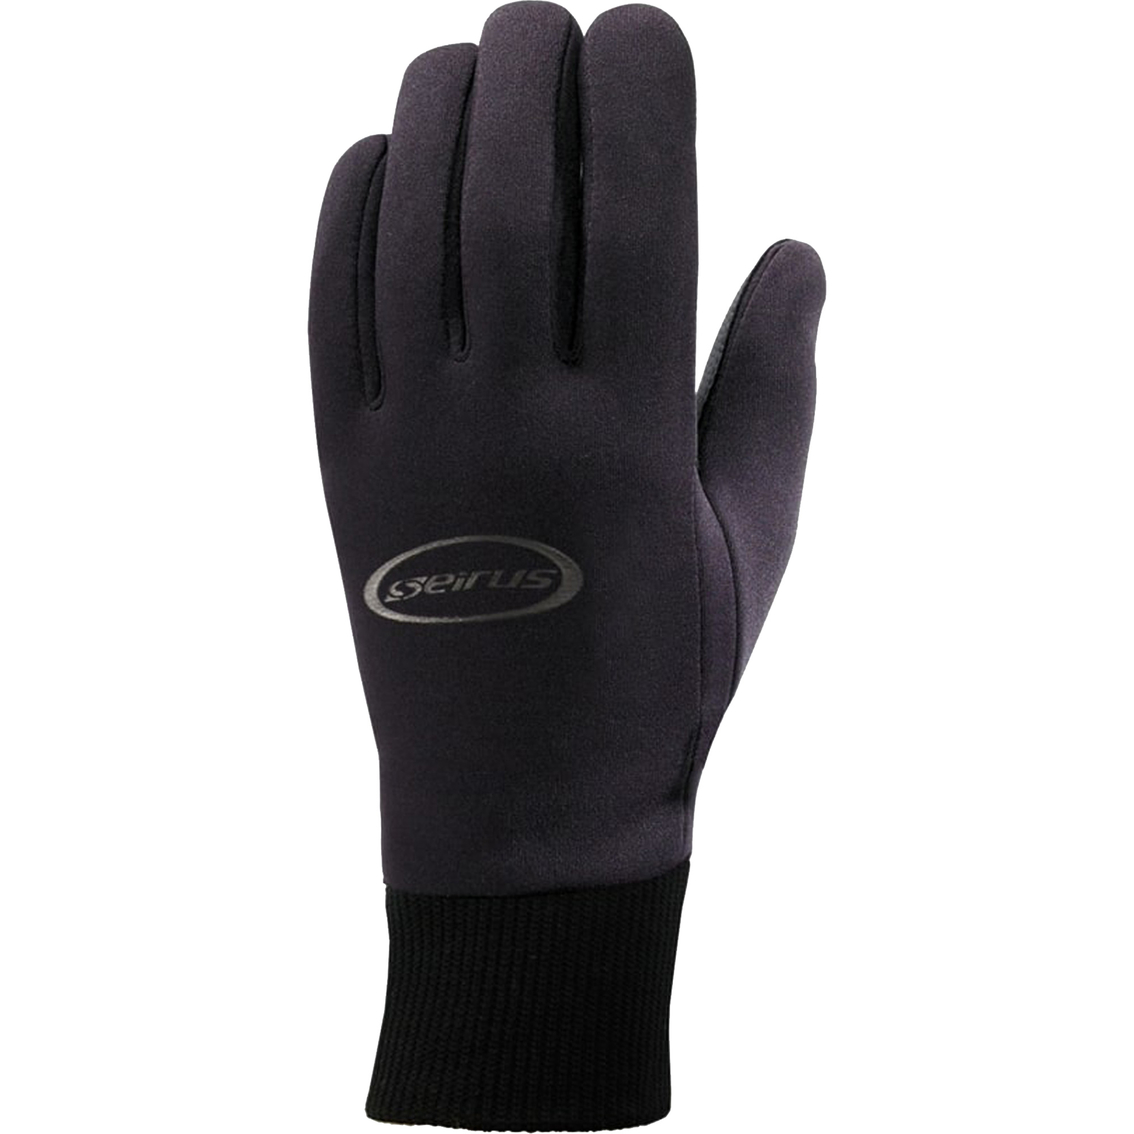 Seirus Innovation Women's Original All Weather Gloves - Image 2 of 2